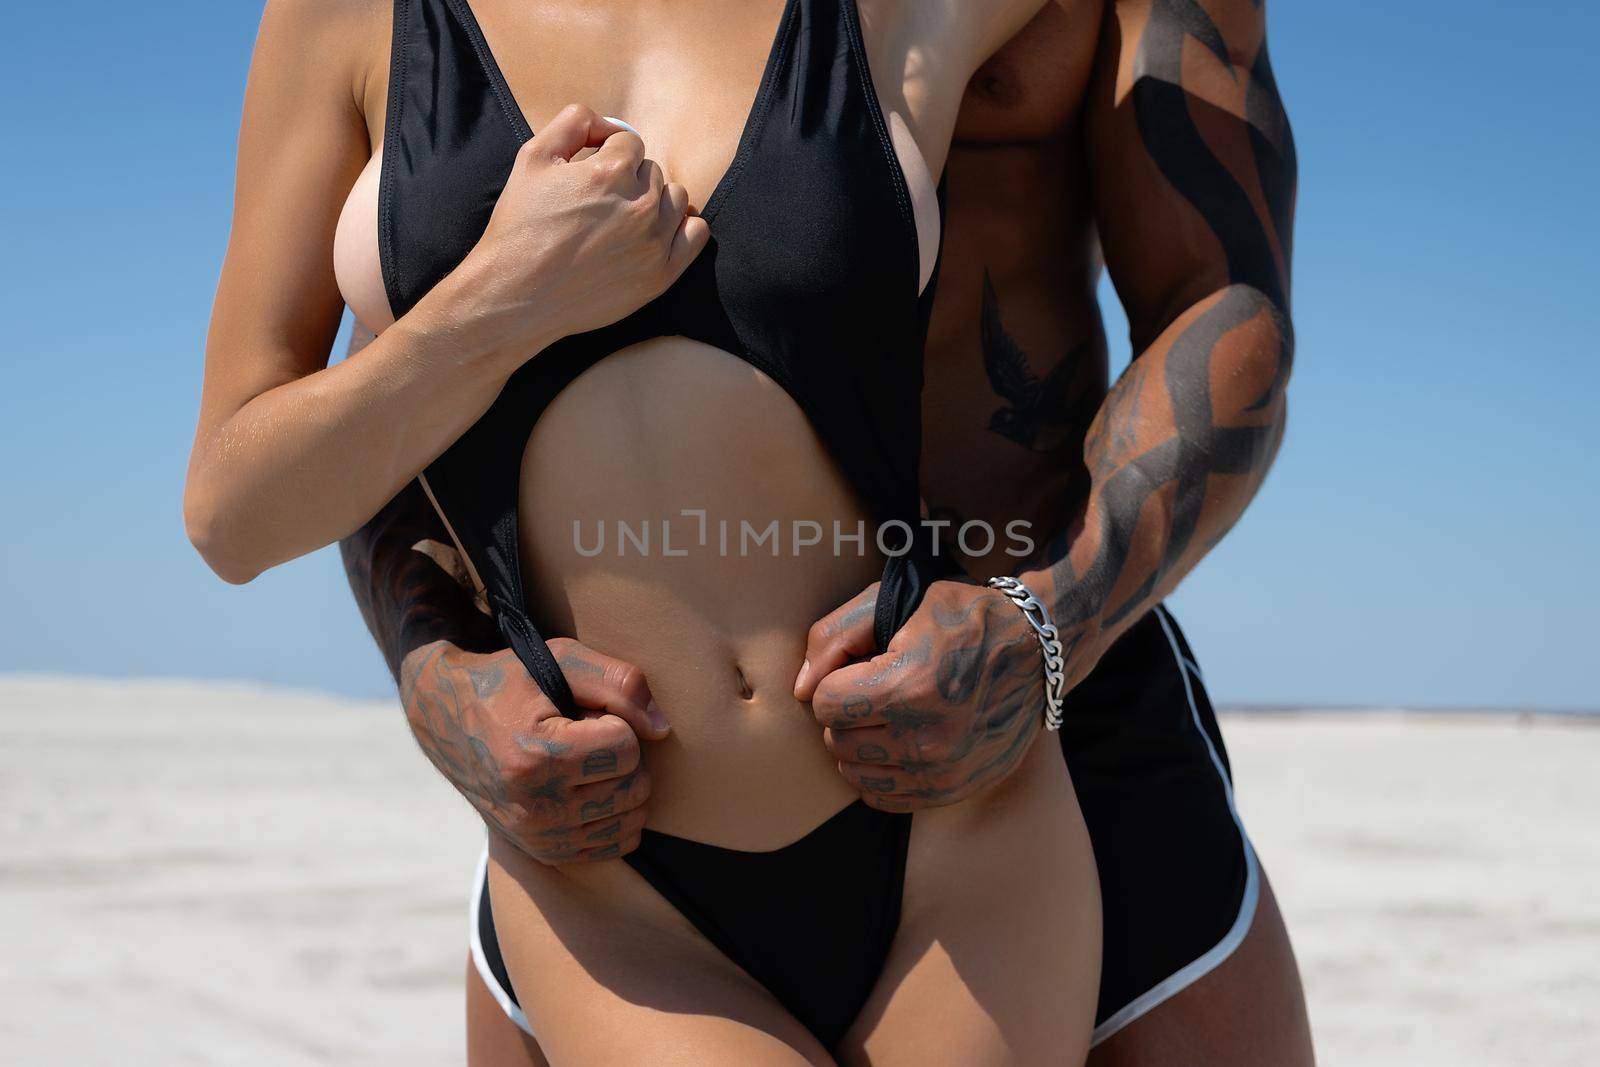 Seductive female in swimsuit and fit male with naked torso hugging while standing on sandy seashore on sunny day in summer